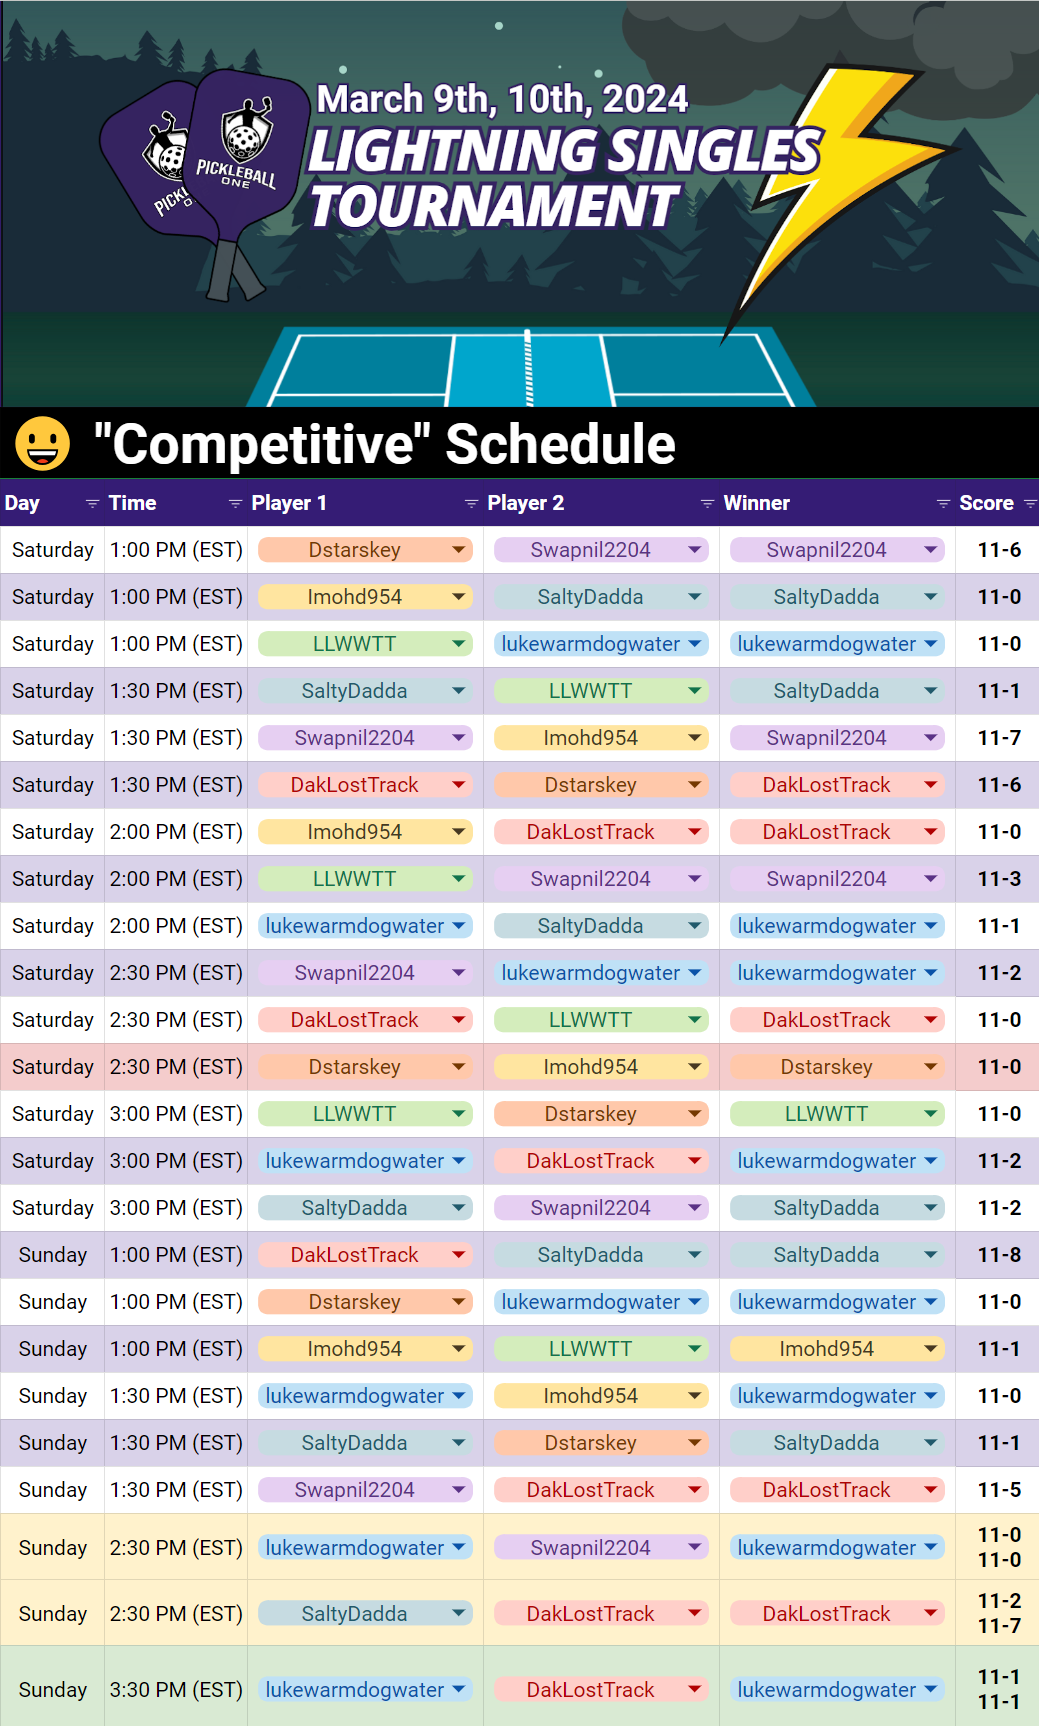 Competitive Match Schedule and Results